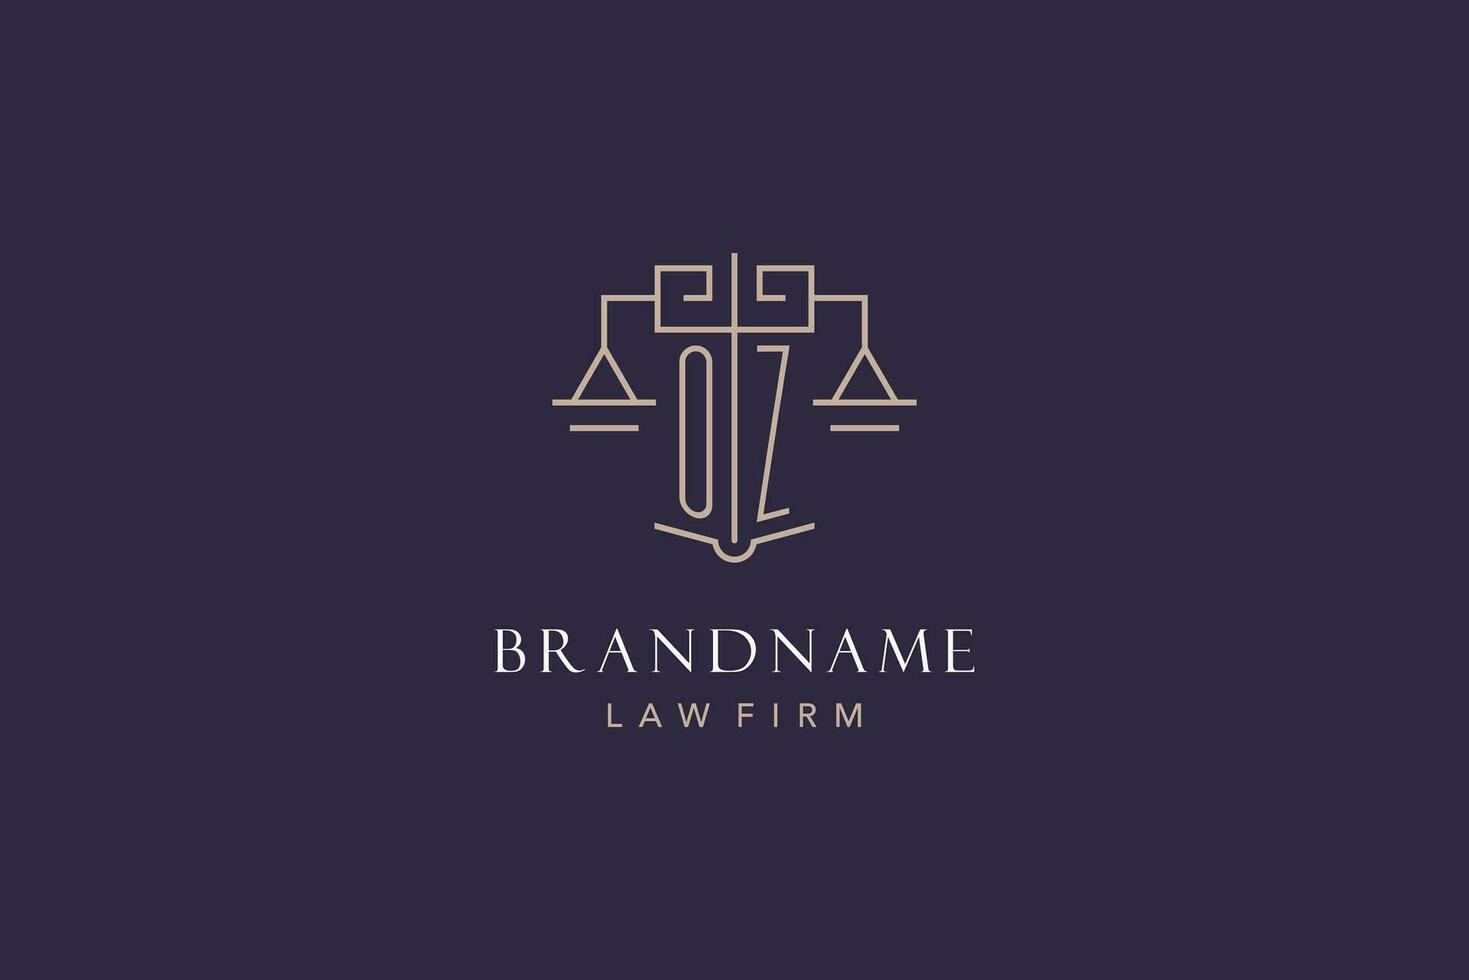 Initial letter OZ logo with scale of justice logo design, luxury legal logo geometric style vector